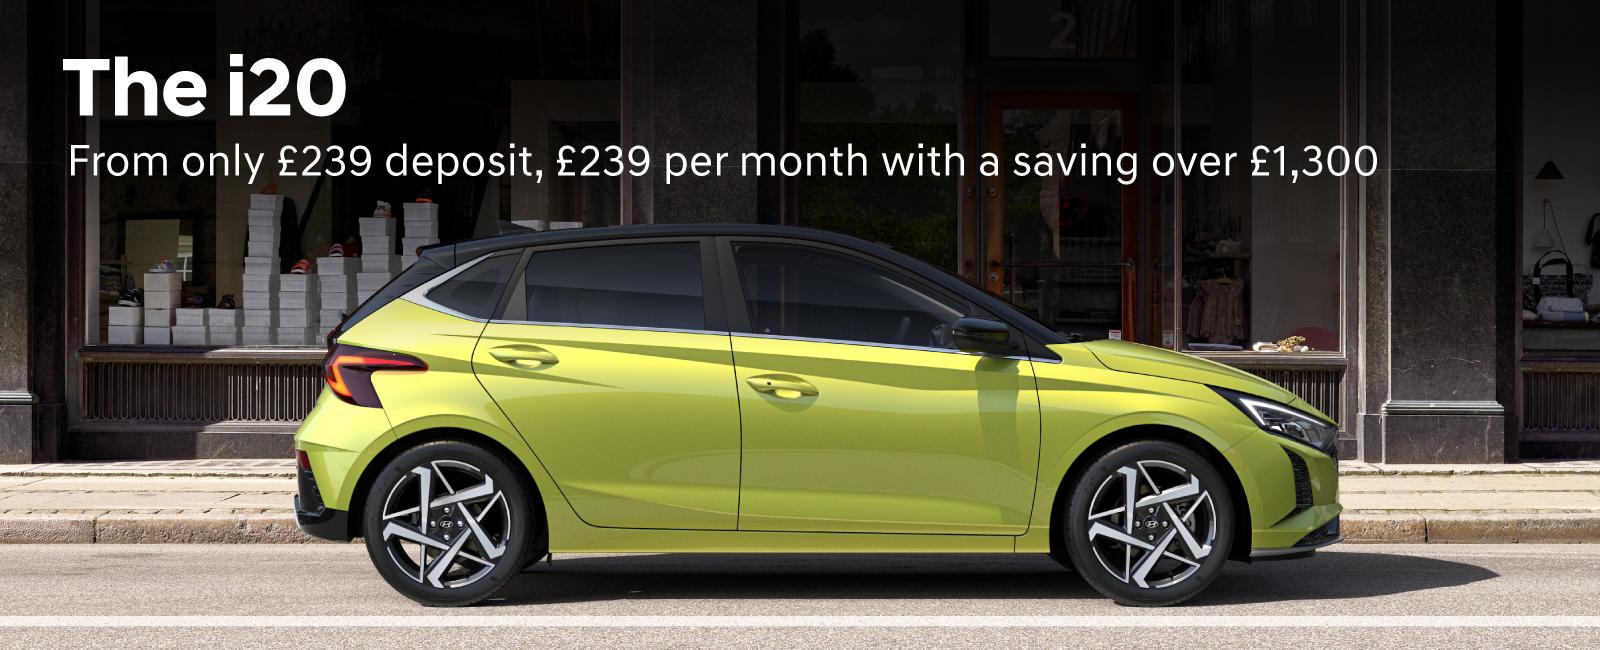 The Hyundai i20 from only £239 deposit, £239 per month